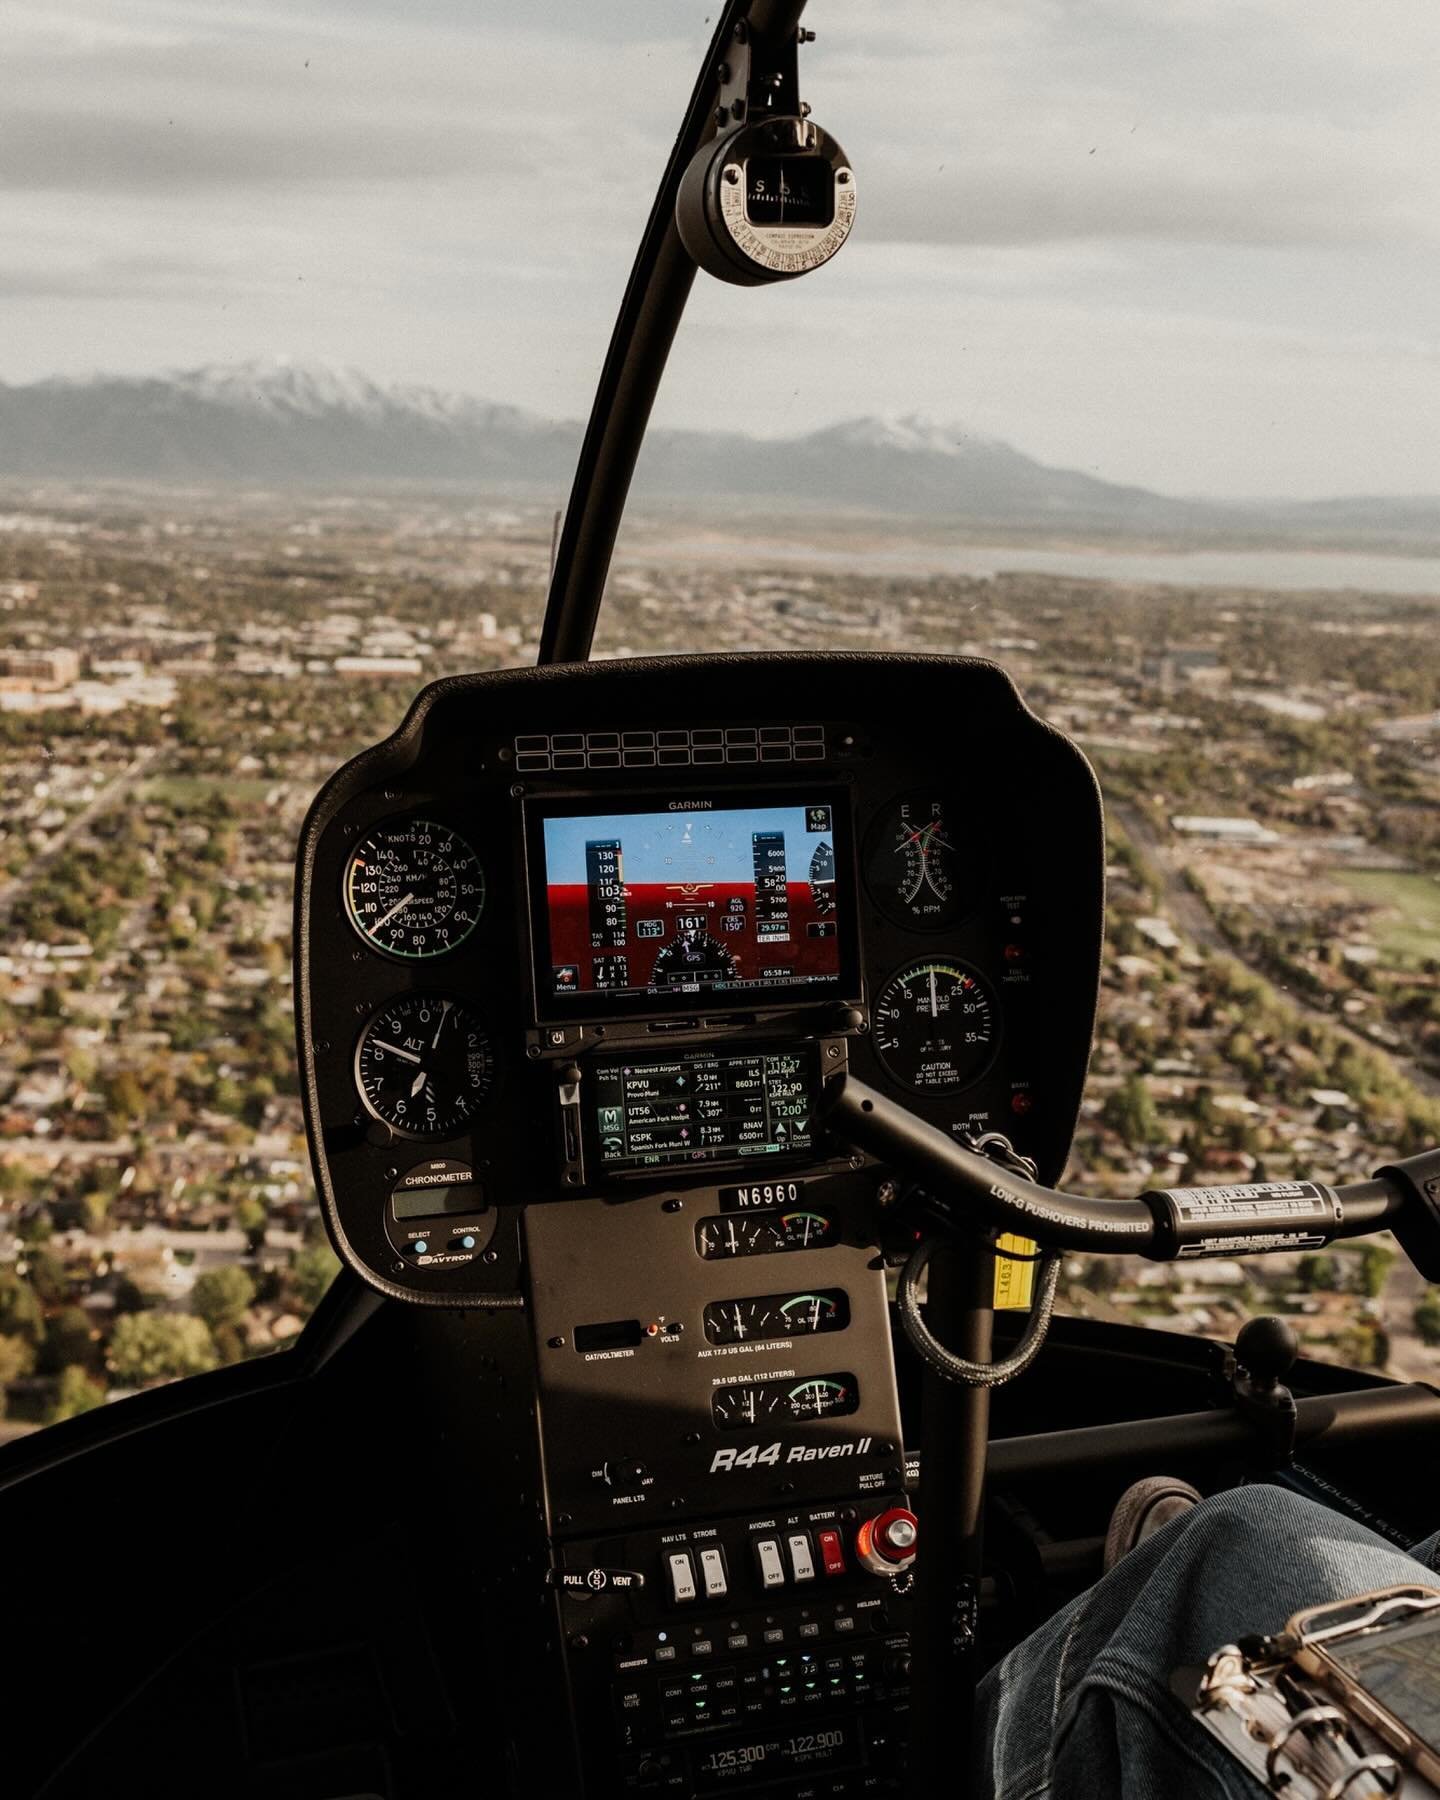 Tana&rsquo;s Favorite Elopement Activity Idea! 🚁 

Maybe it&rsquo;s because my dad flew a piper plane, but I love being in the skies! ⛅️ 

Helicopters are so smooth and such a fun and memorable way to enjoy your elopement or experience an adventure 